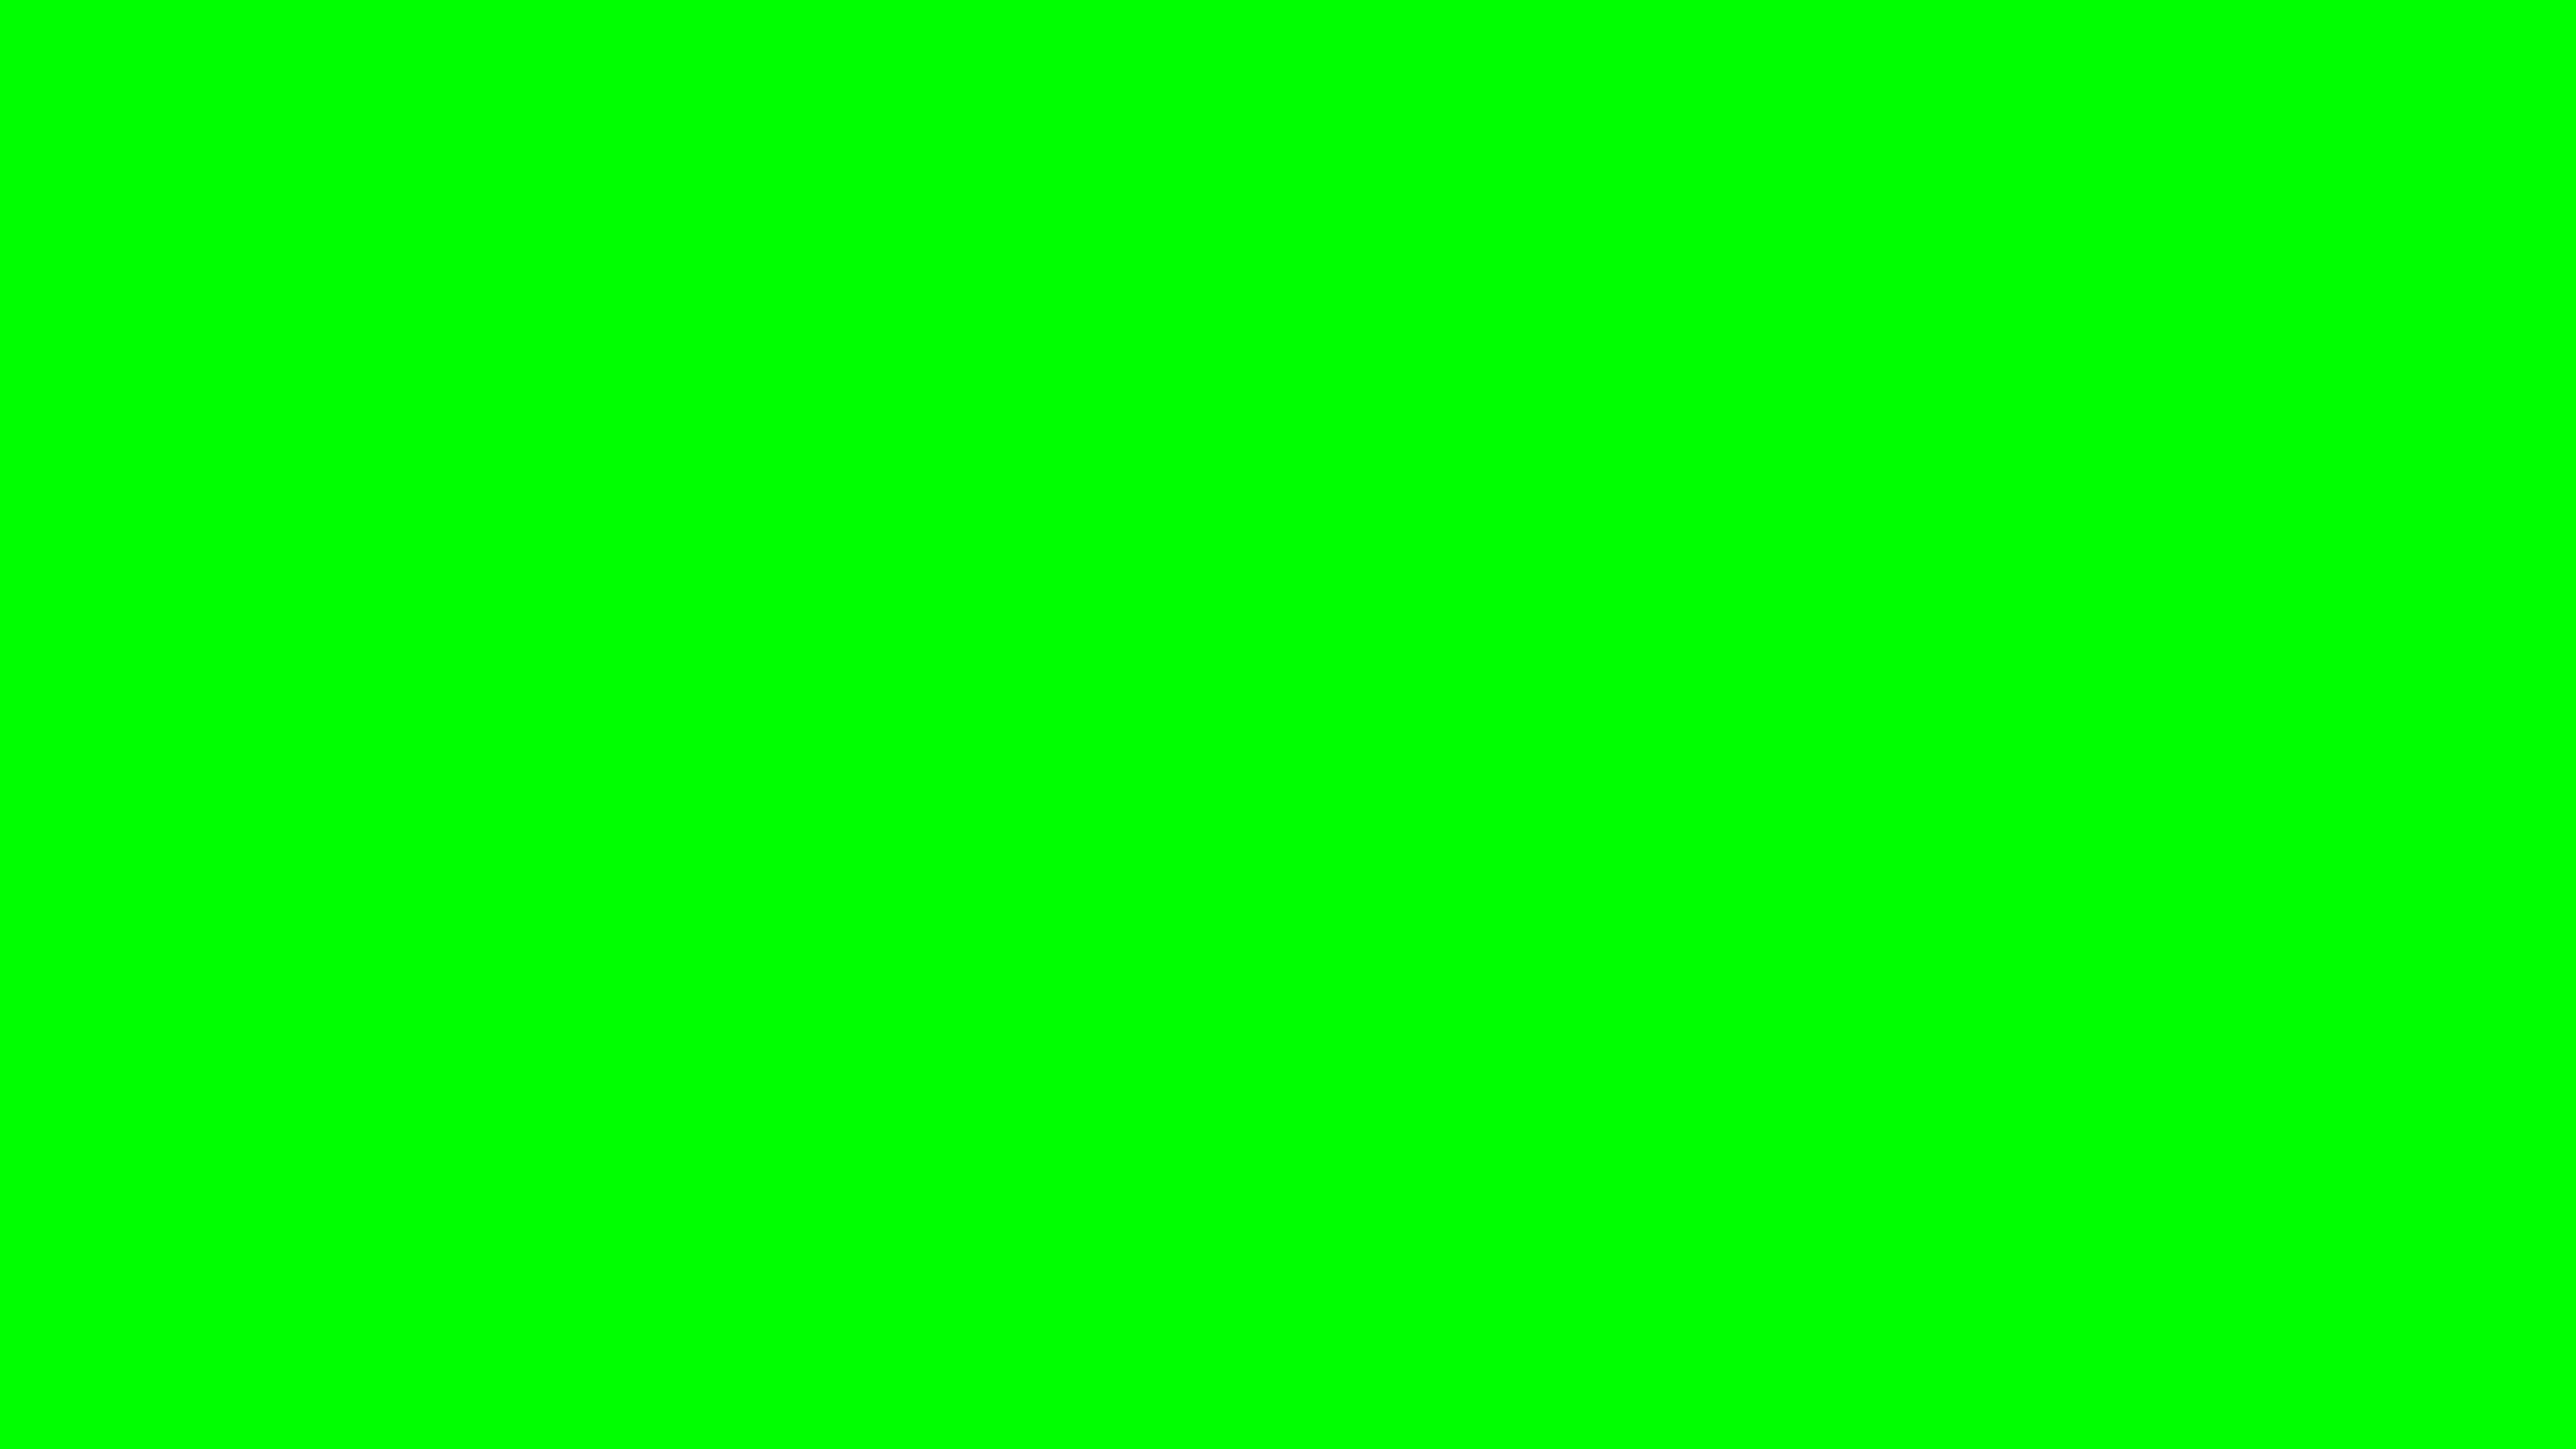 7680x4320 Green X11 Gui Green Solid Color Background